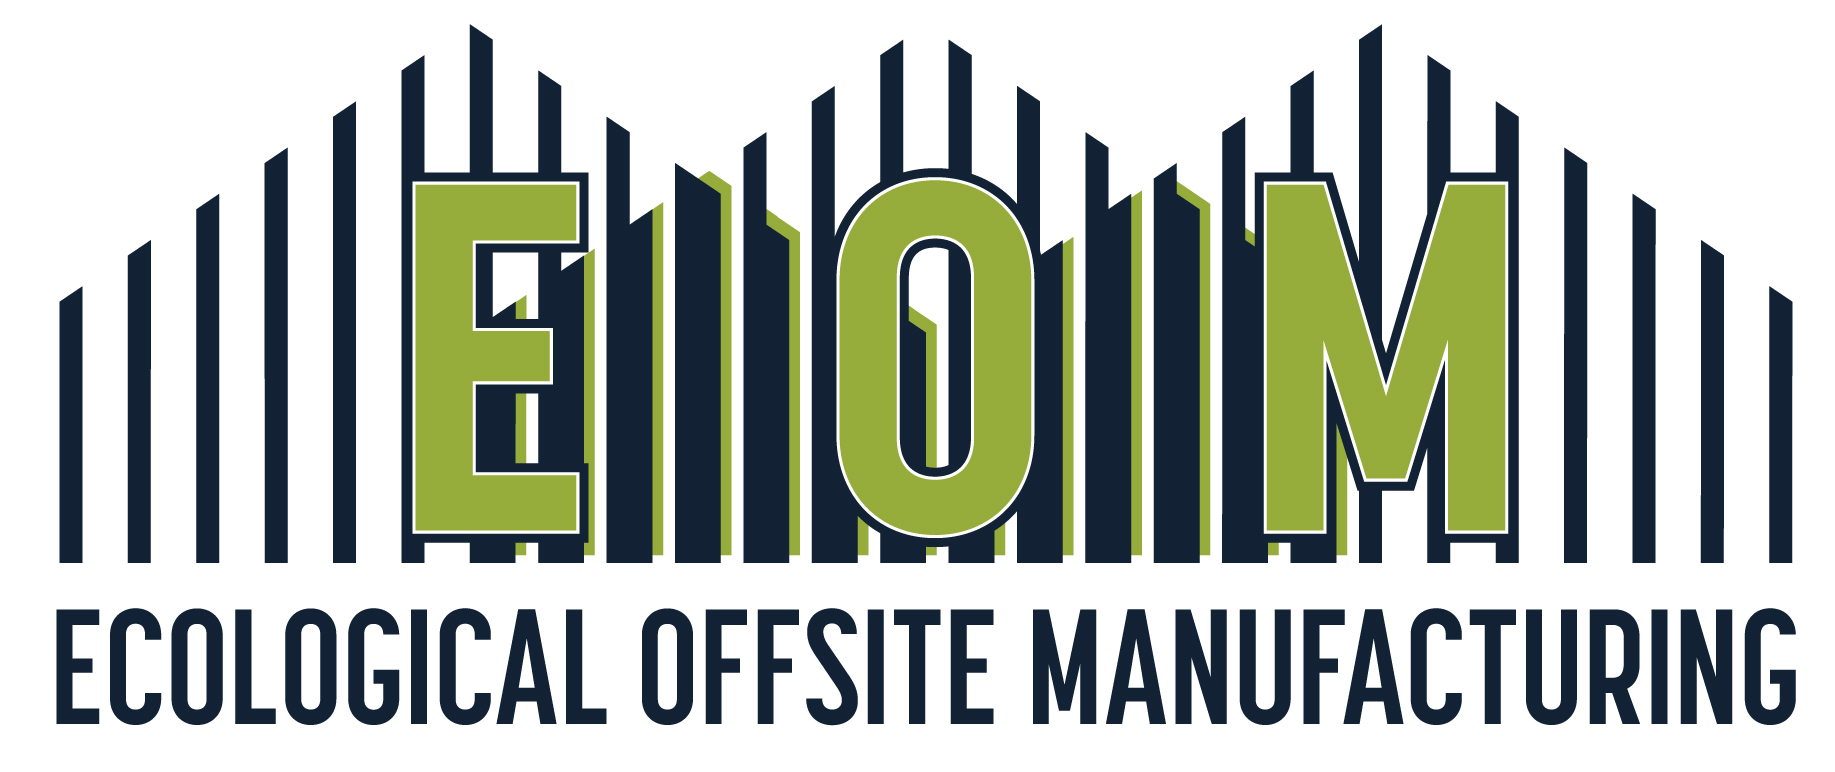 Ecological Offsite Manufacturing